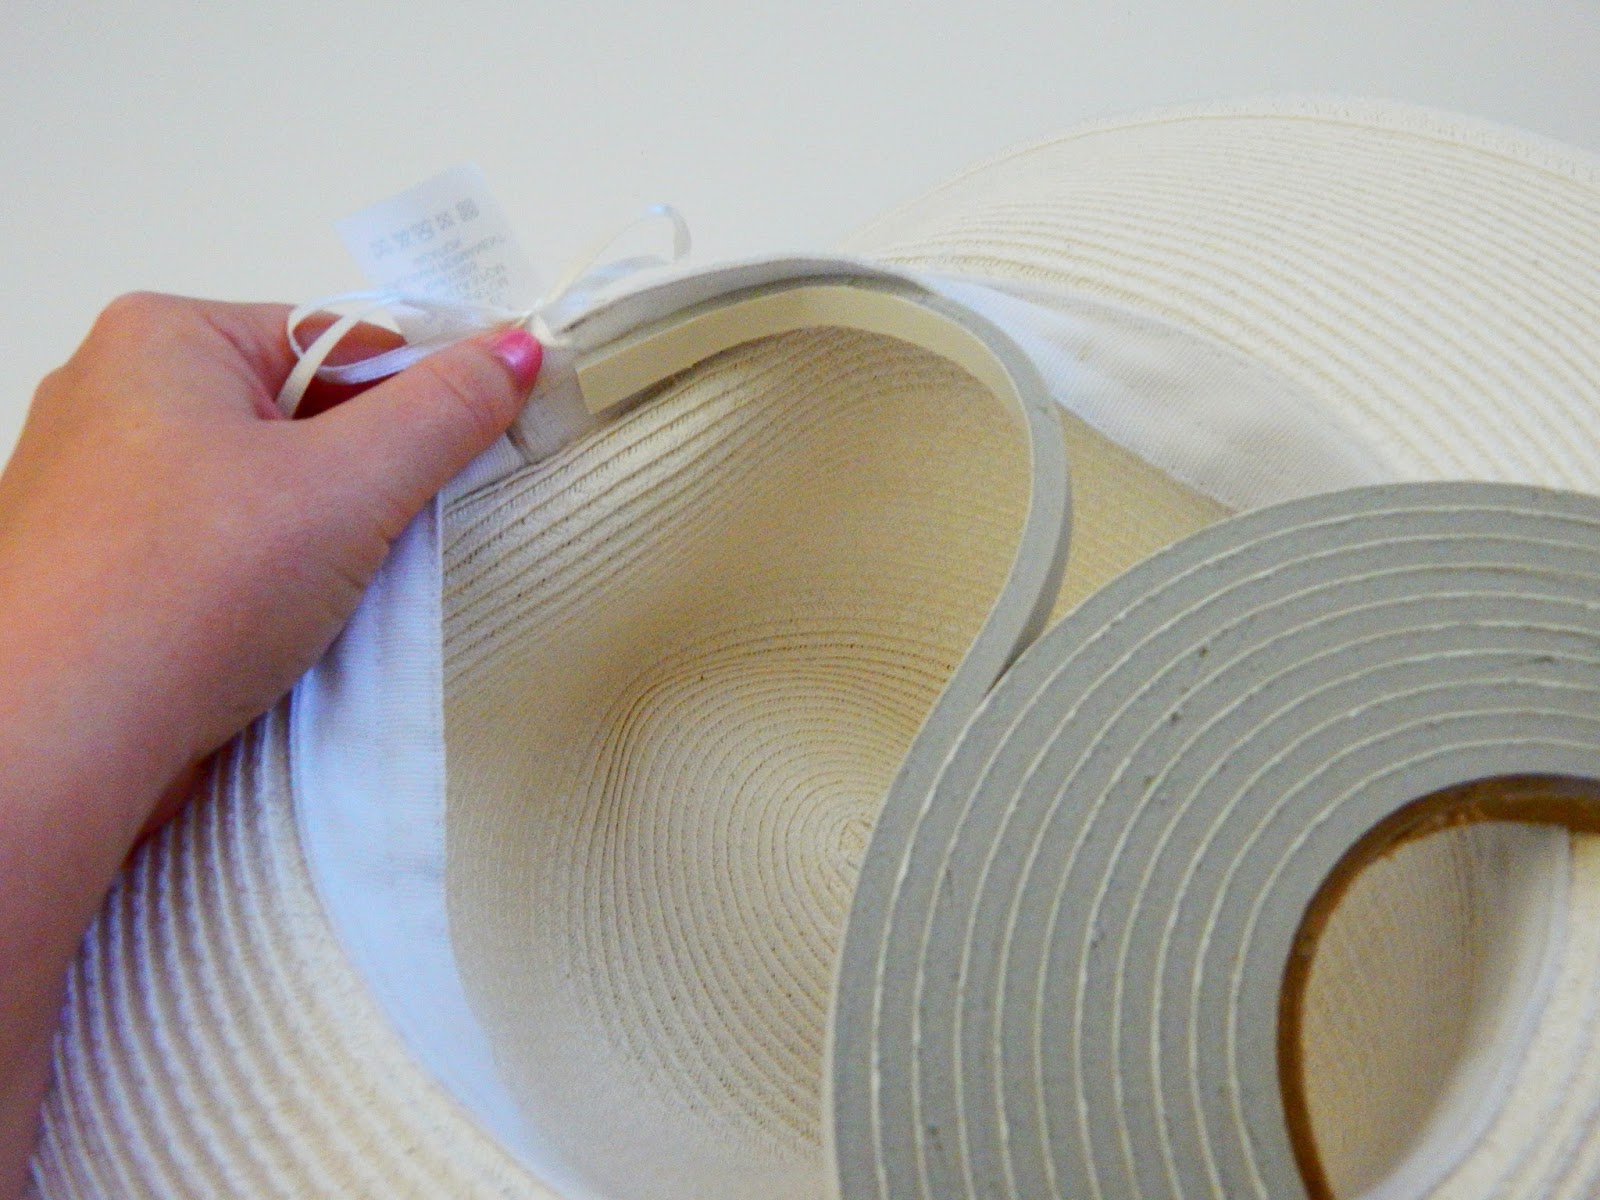 How to Resize a Hat On a Budget